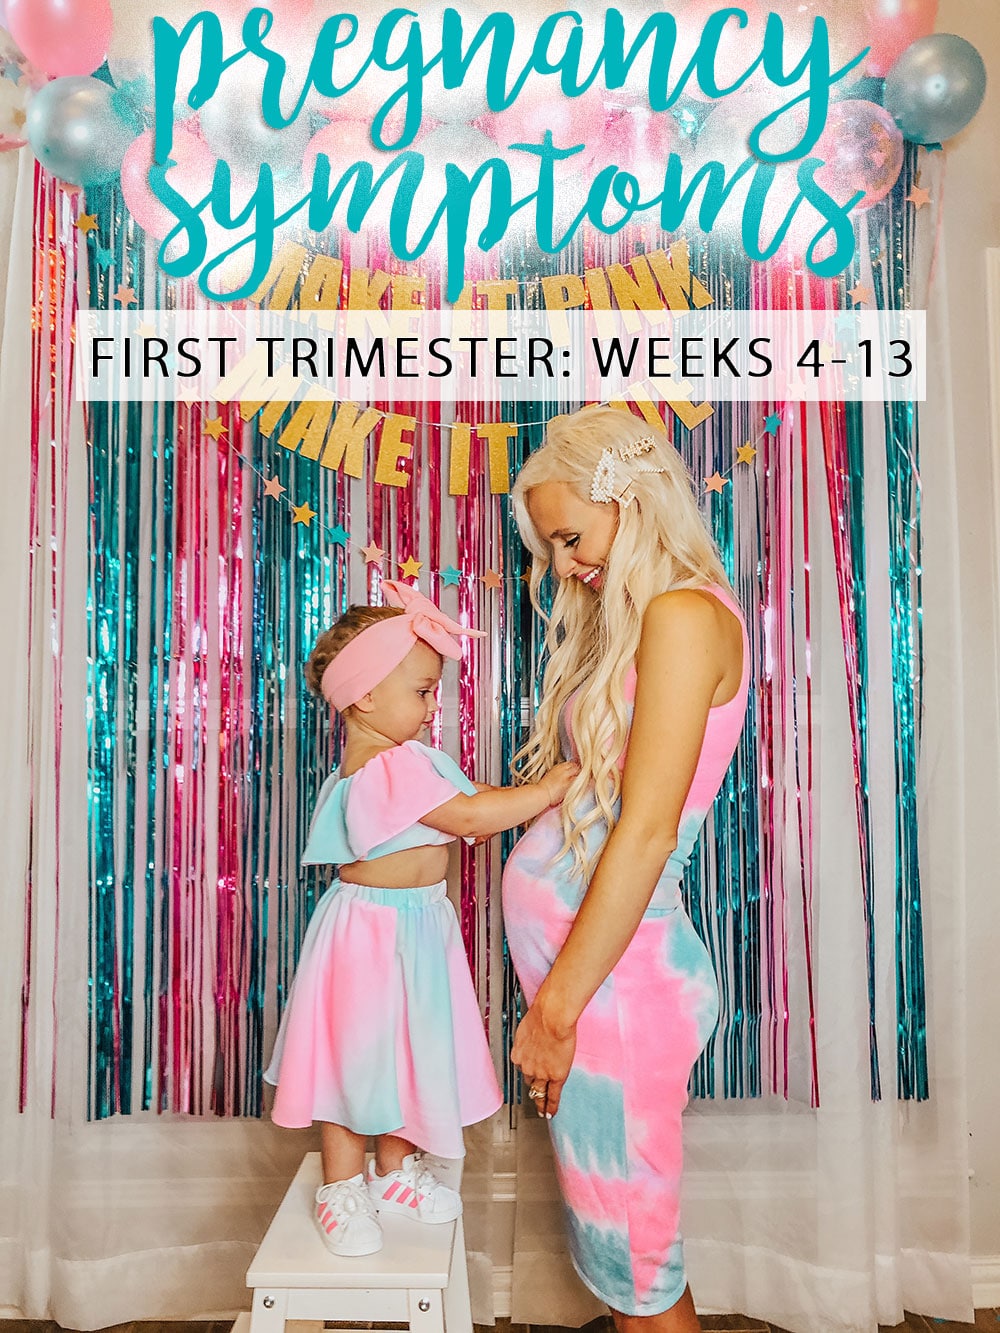 pregnancy symptoms by week - first trimester - weeks 4 - 13 - baby announcement photo with toddler